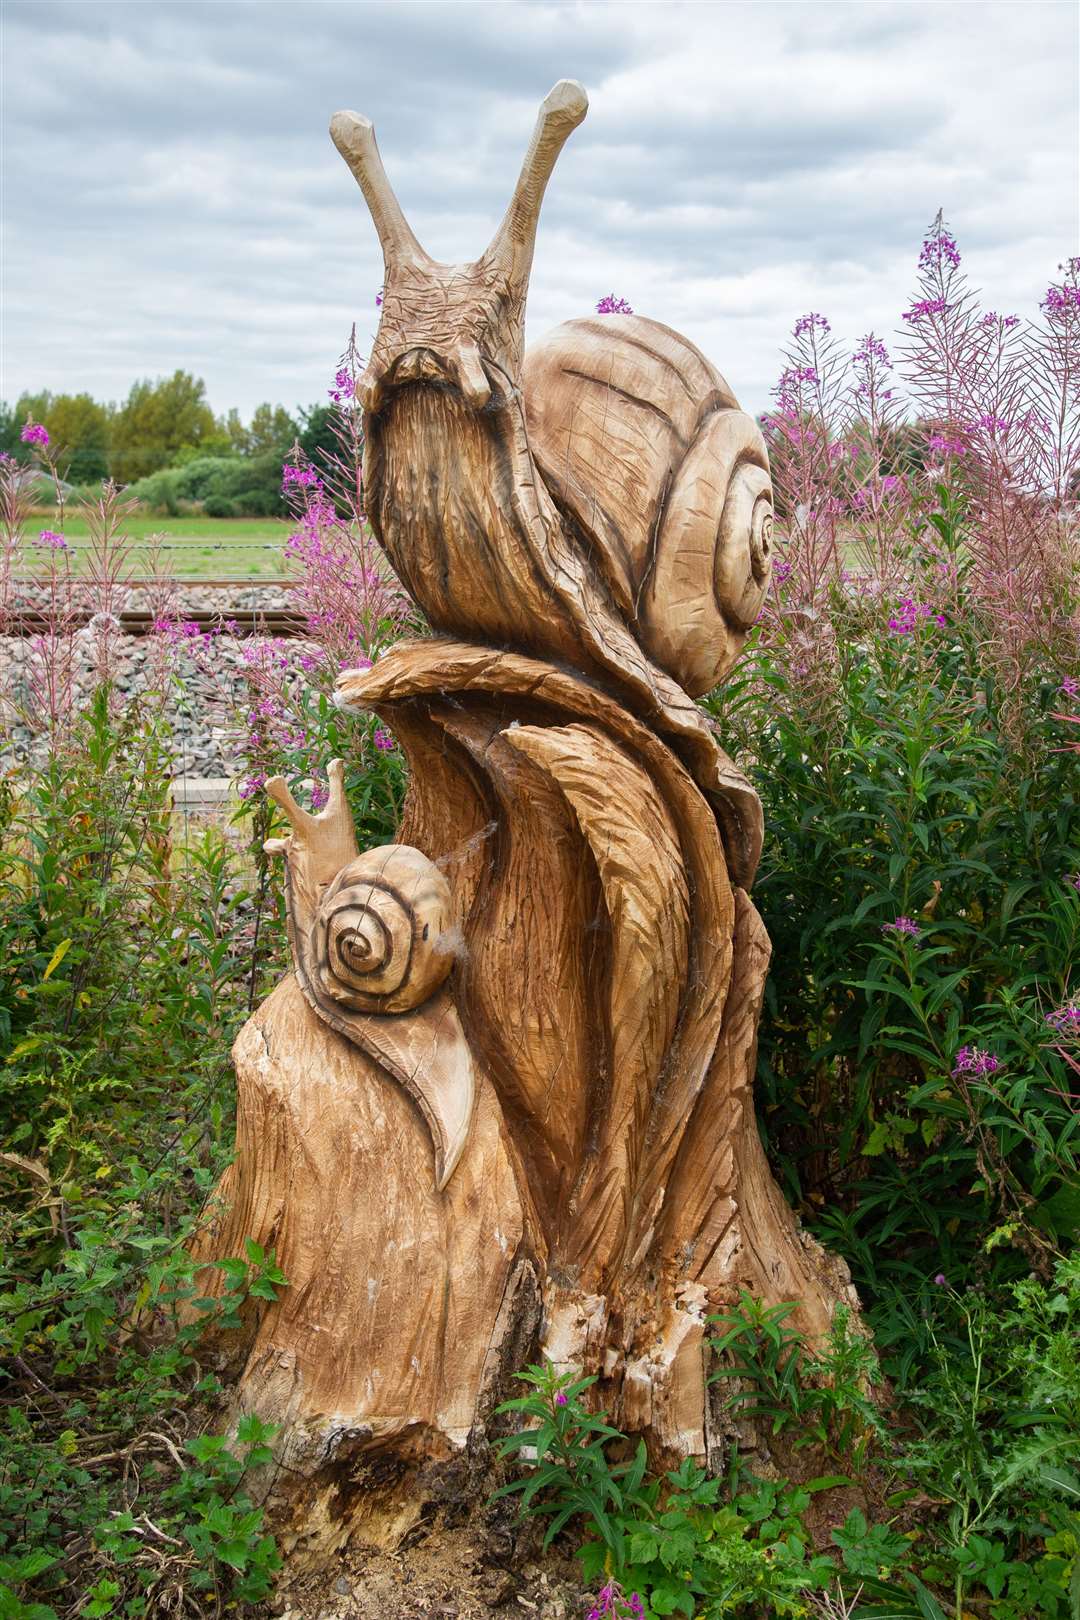 A nearby stump has been carved.